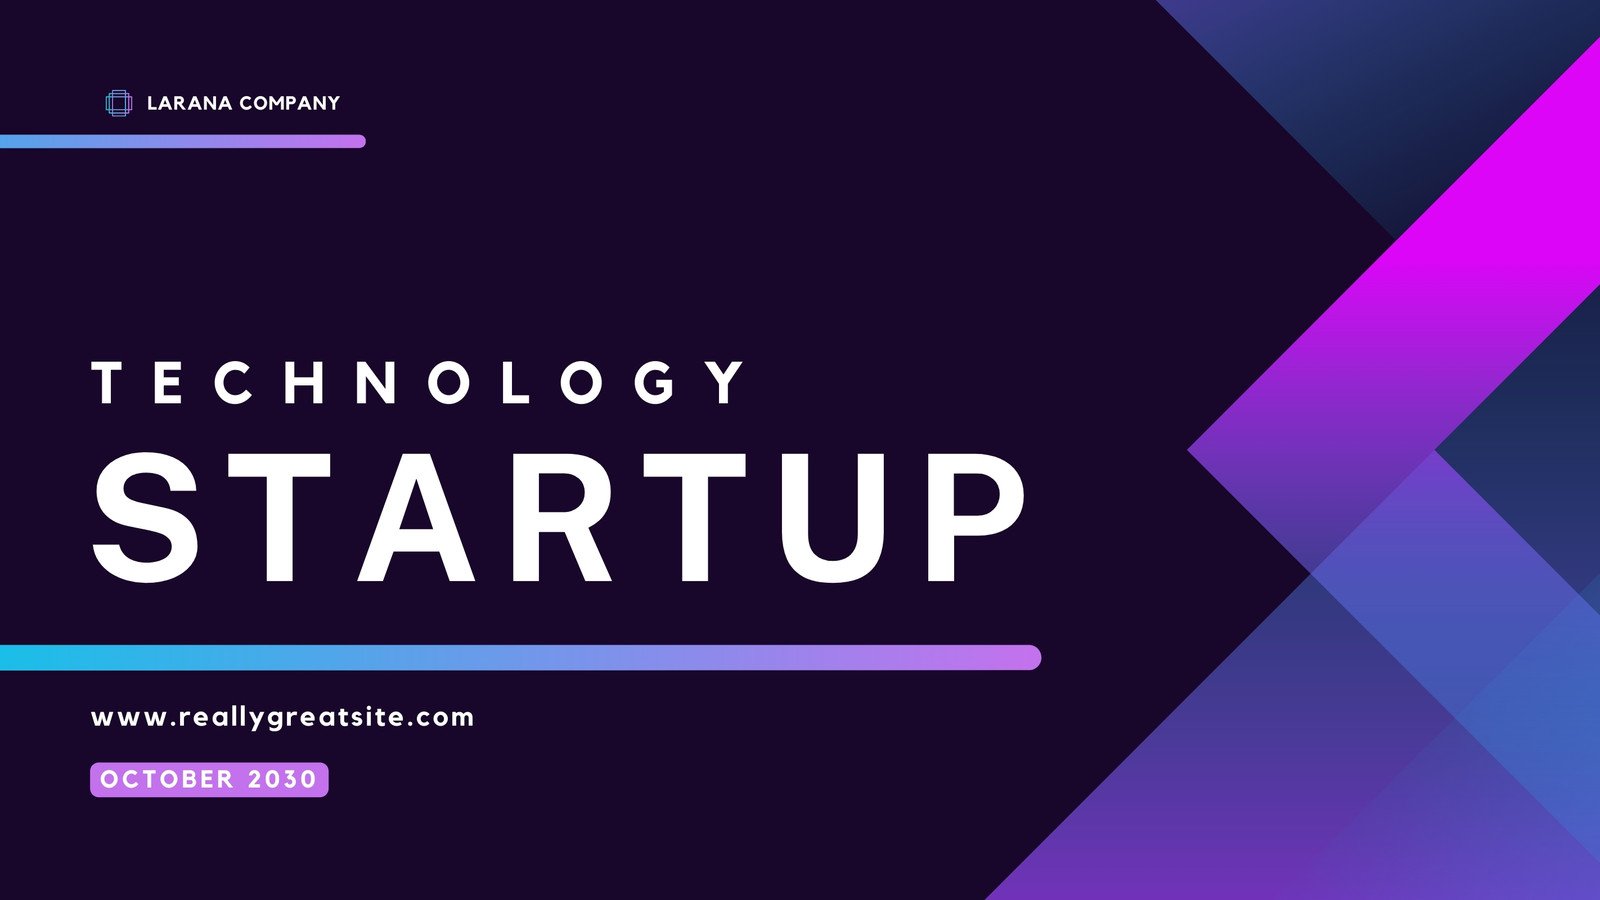 White and Purple Professional Technology Startup Business Company Presentation